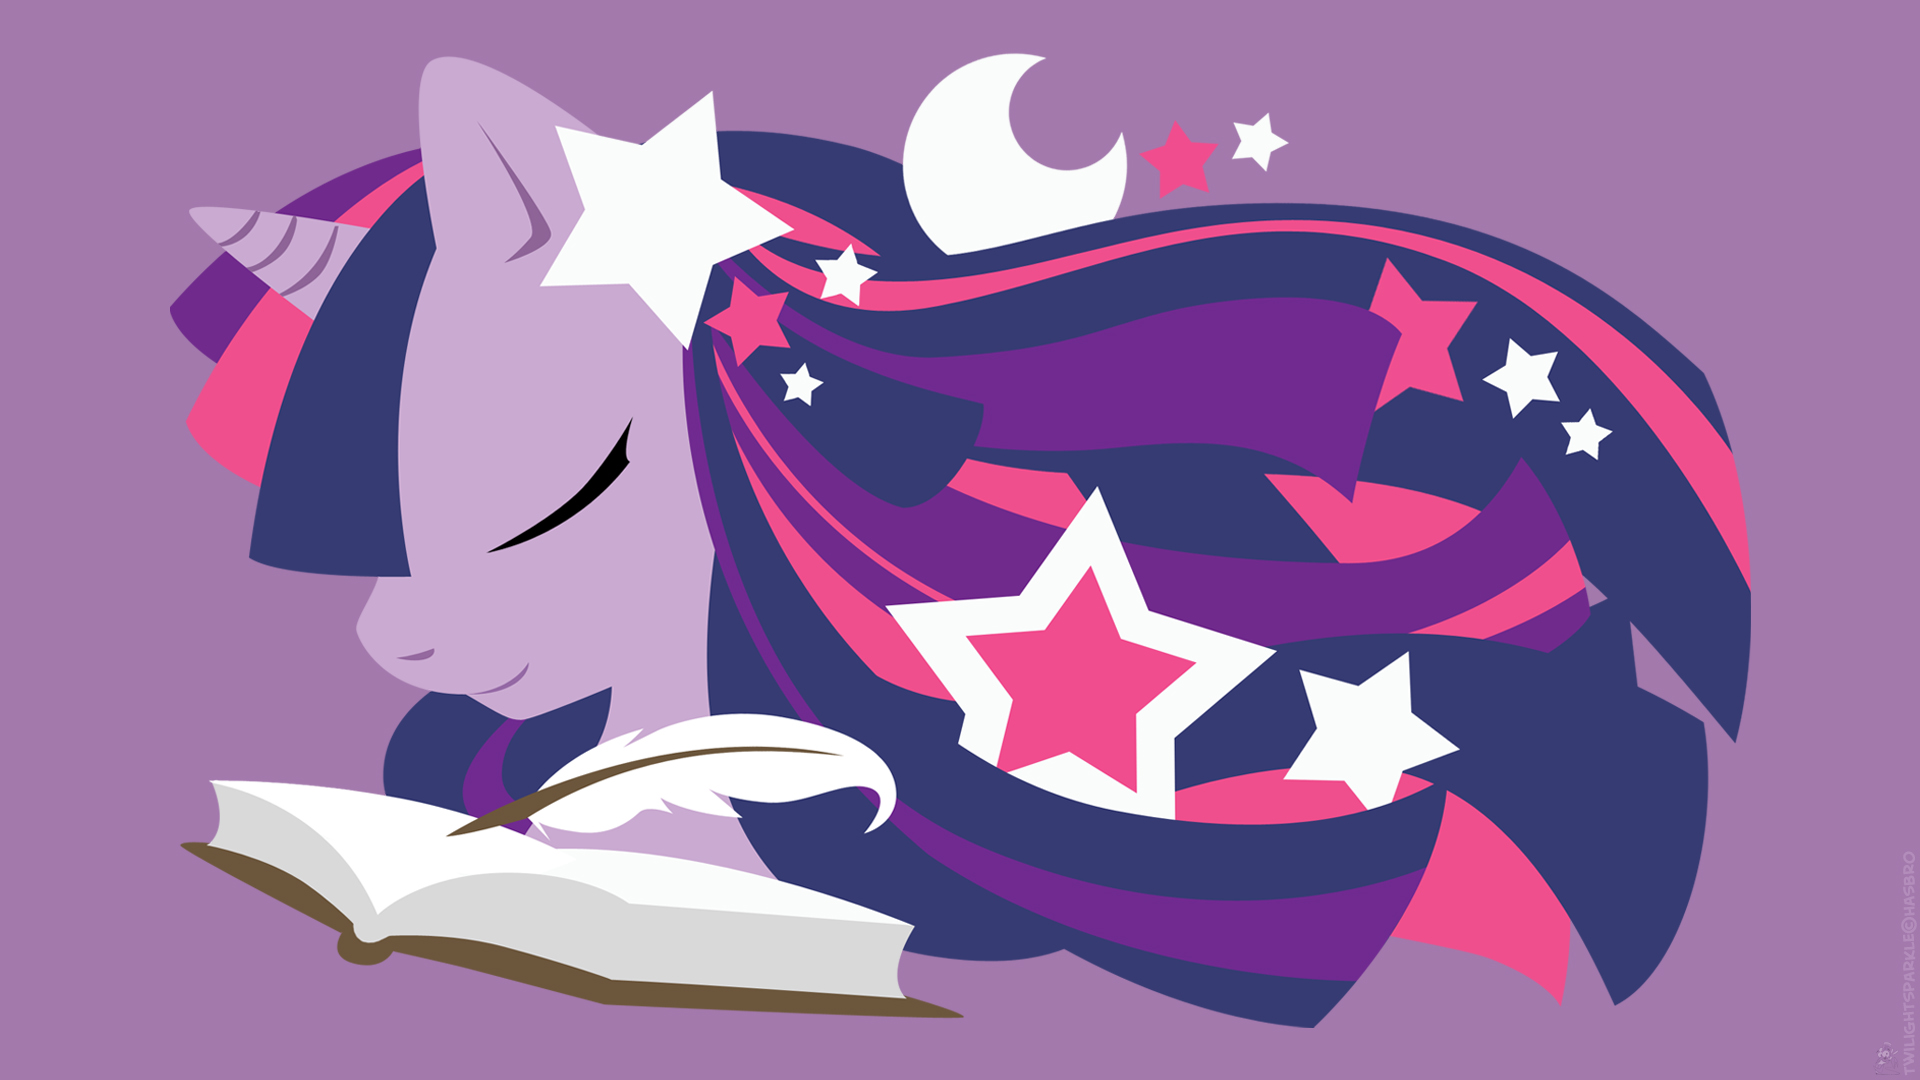 Bookworm 1920x1080 wallpaper by raygirl